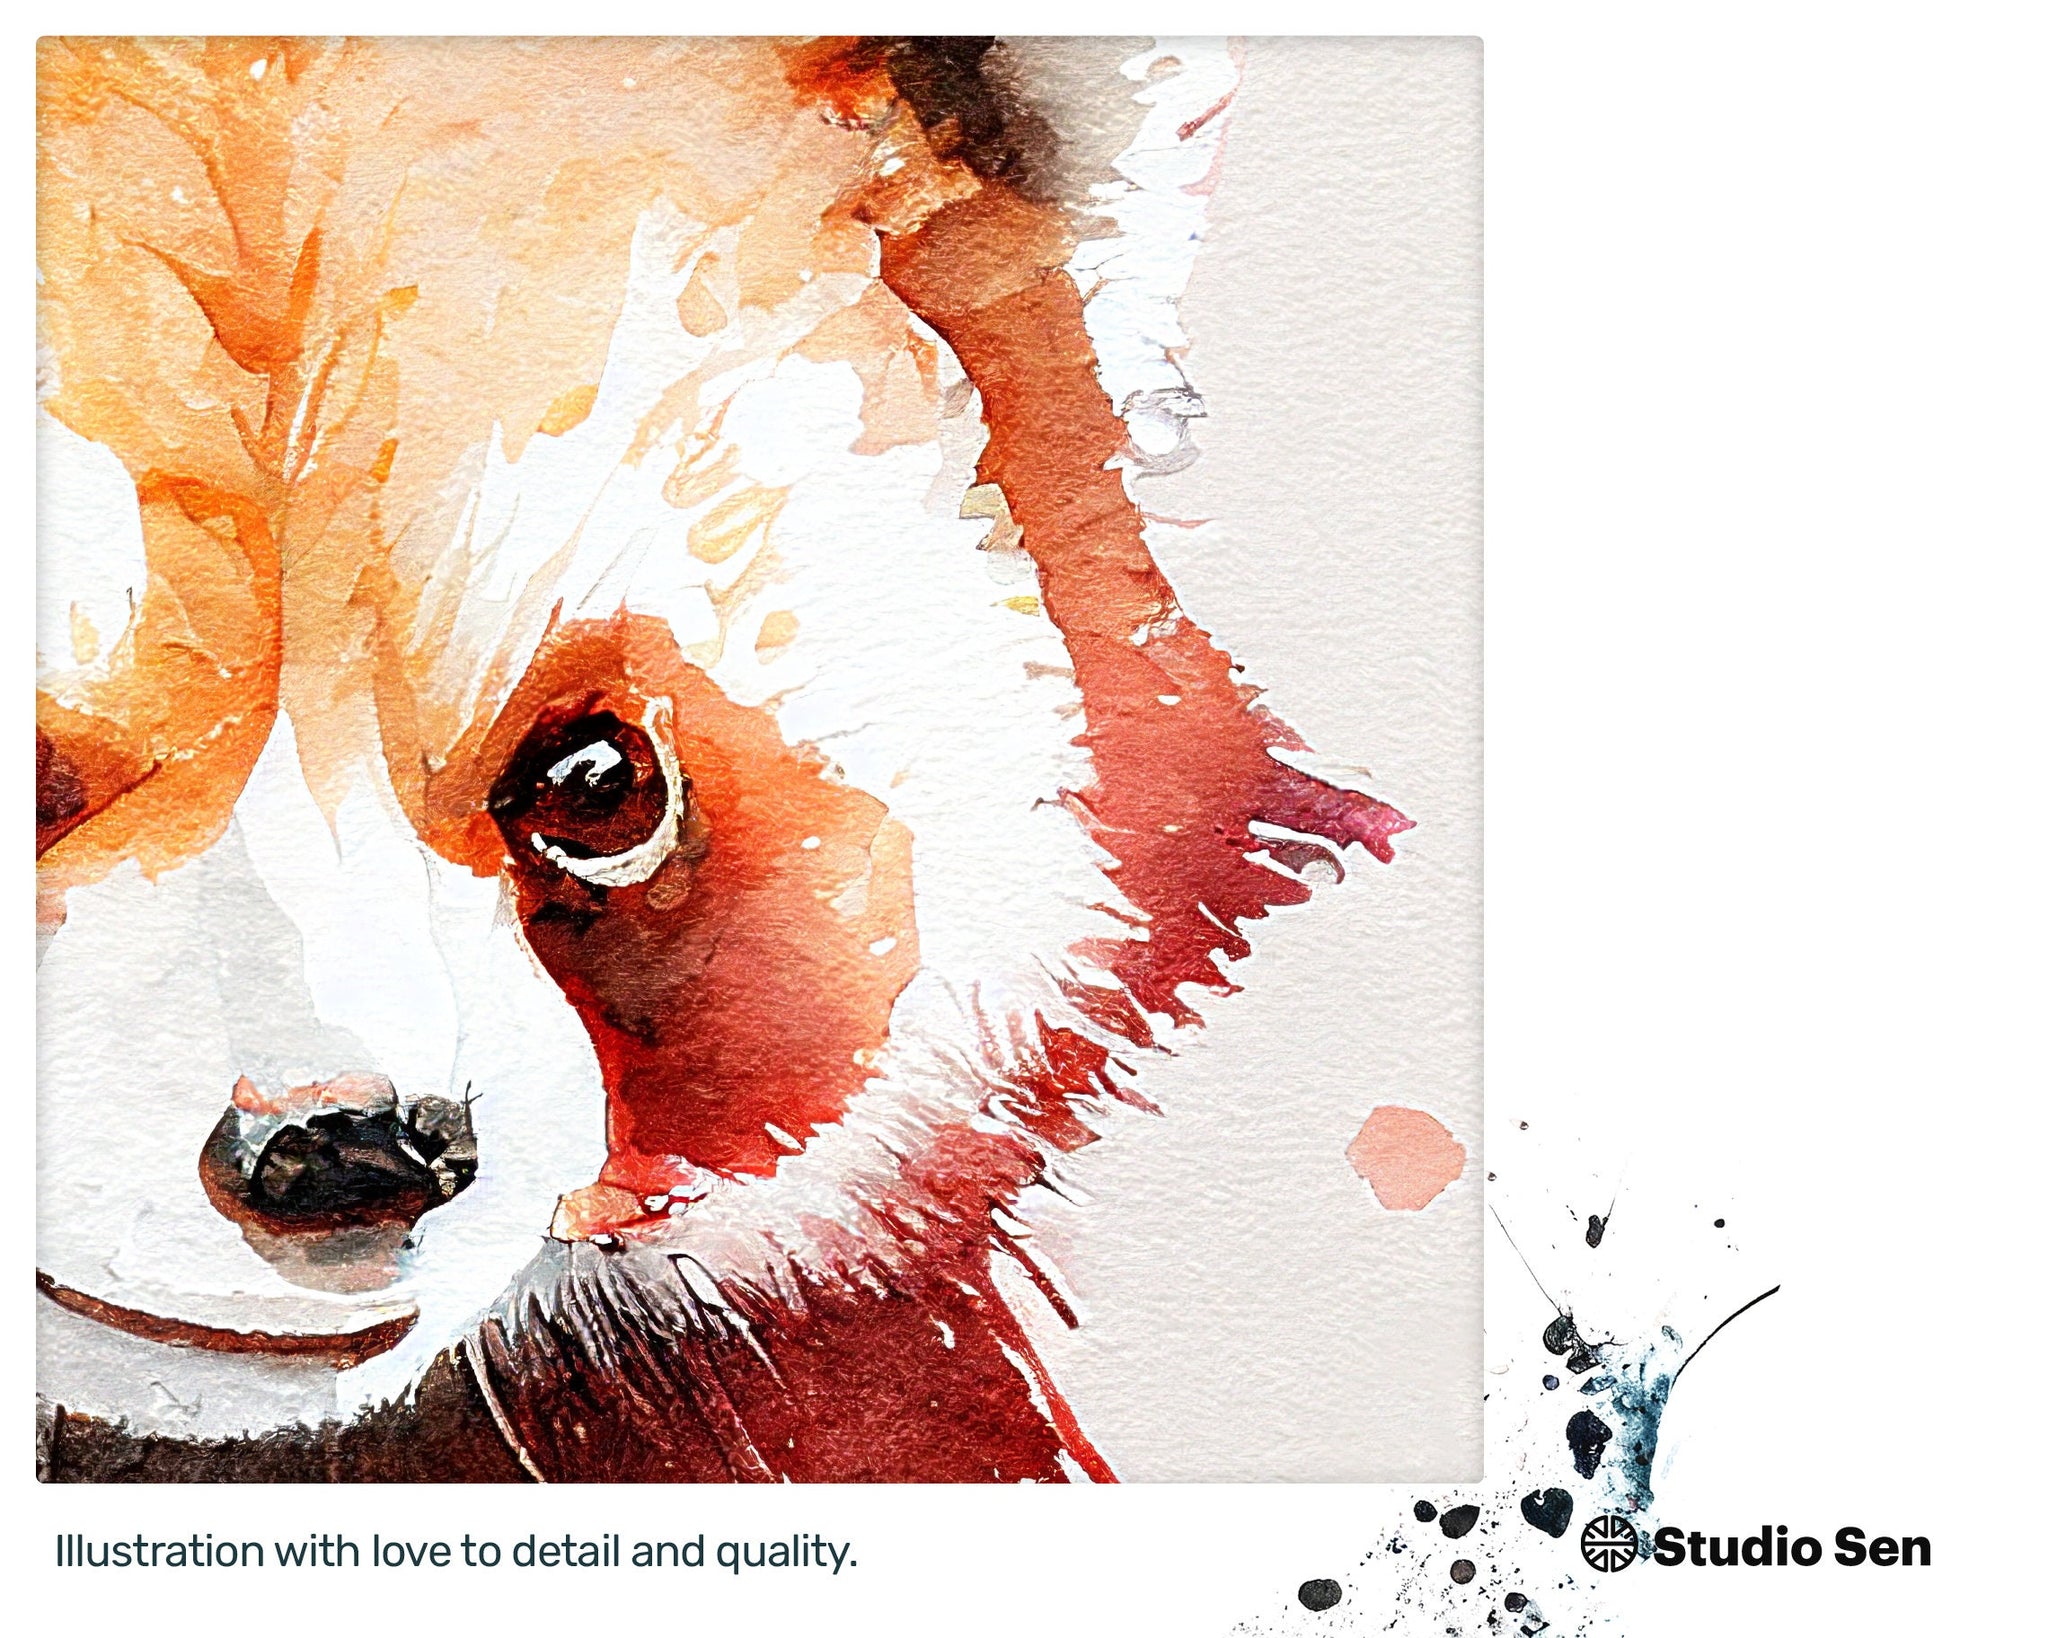 Calm Vogue Yoga Red Panda, Zany Fun Art, Cheerful Painted Intriguing Xclusive Lively Download